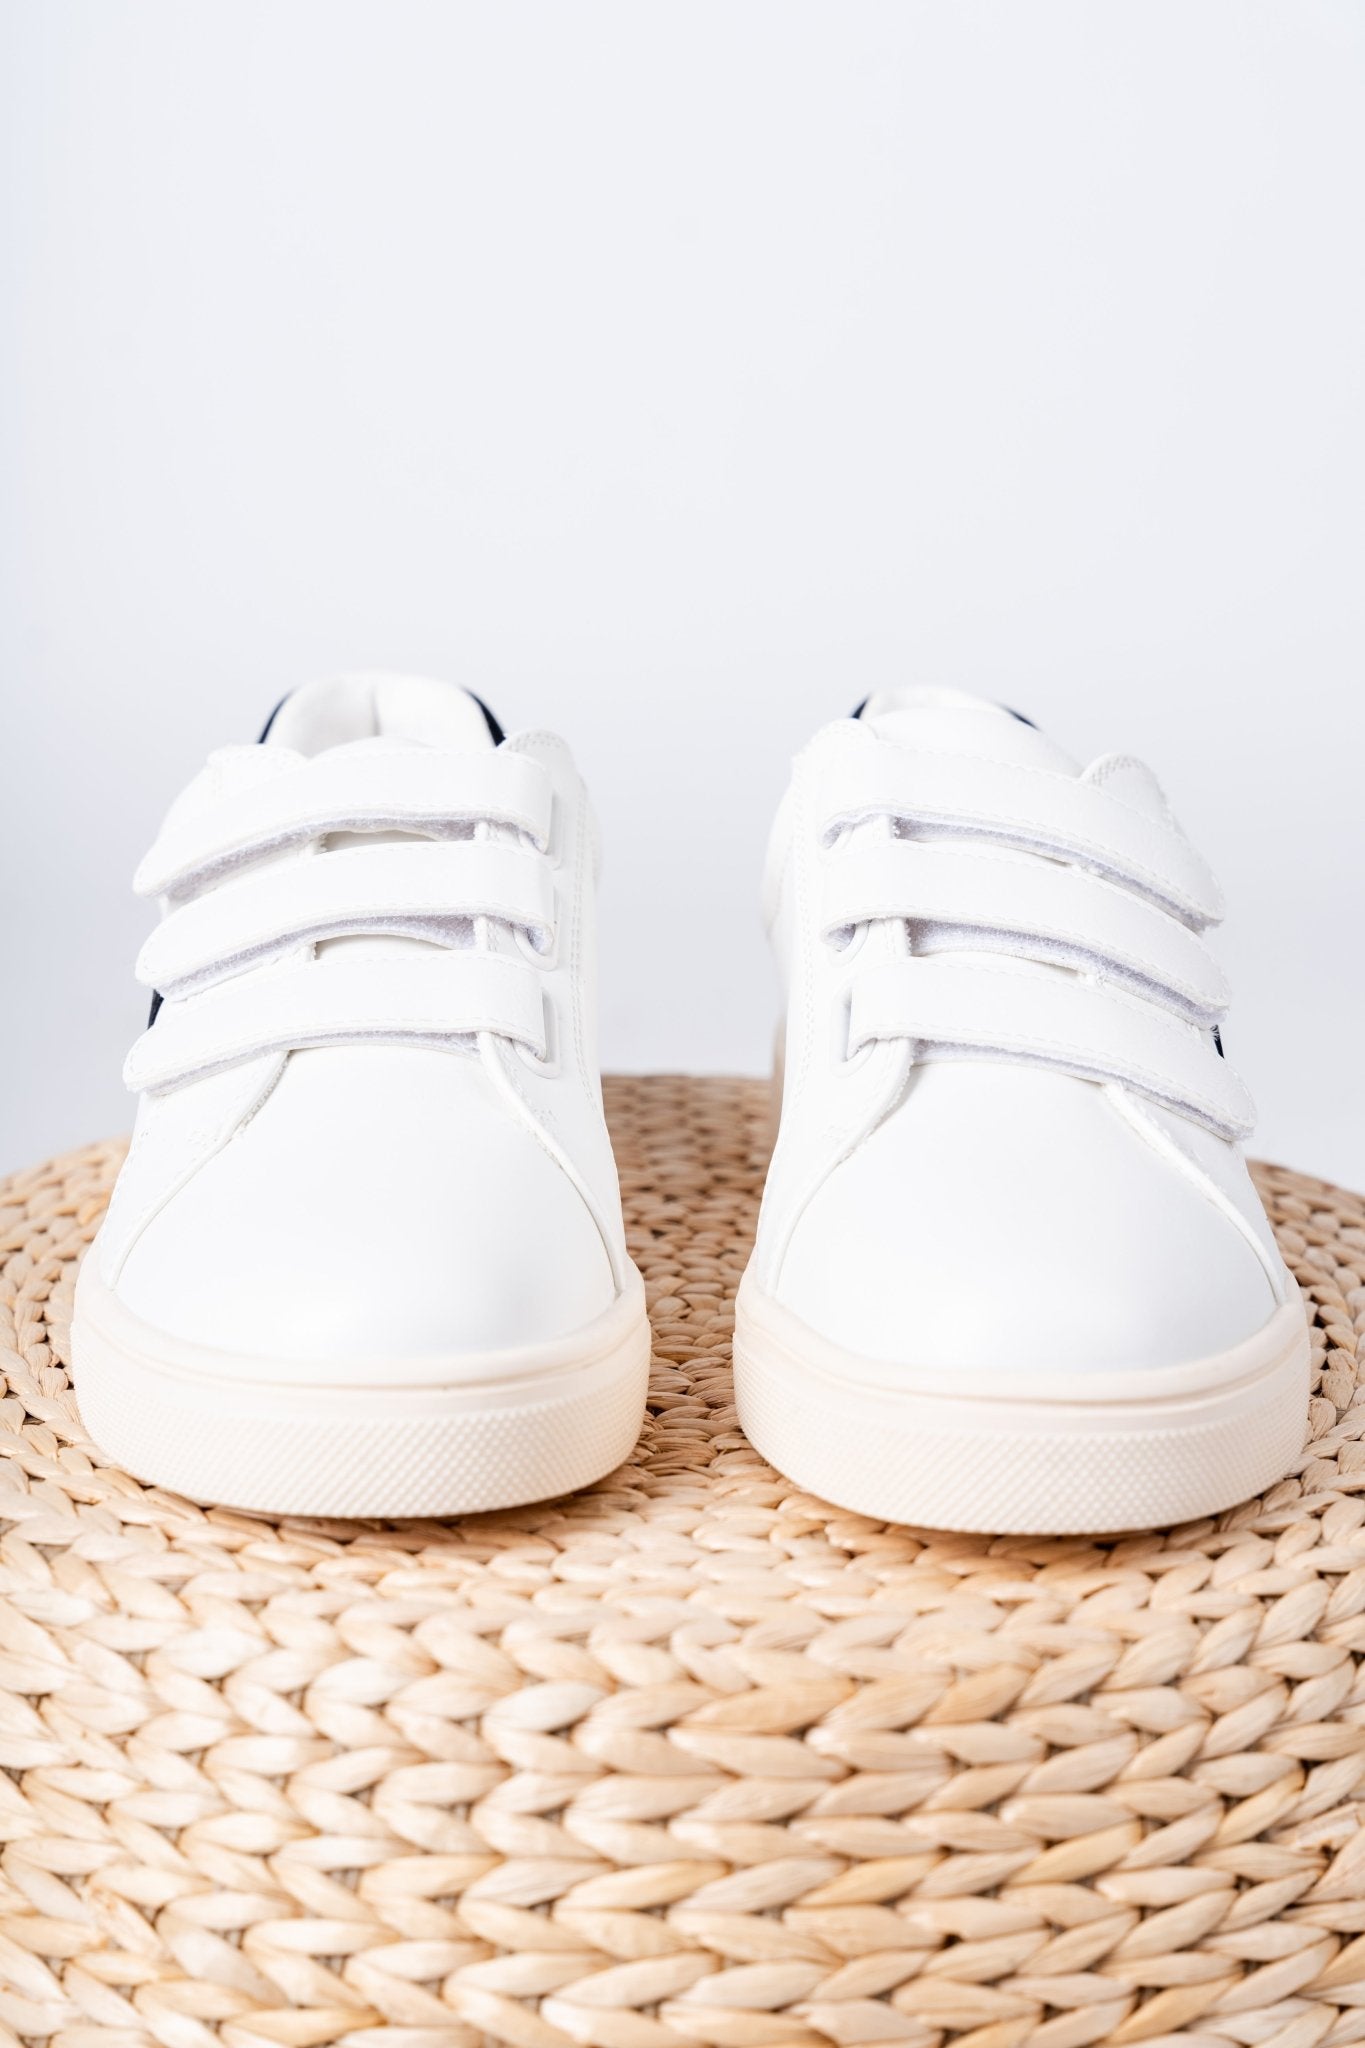 Izzie low top sneaker white/black - Trendy Shoes - Fashion Shoes at Lush Fashion Lounge Boutique in Oklahoma City